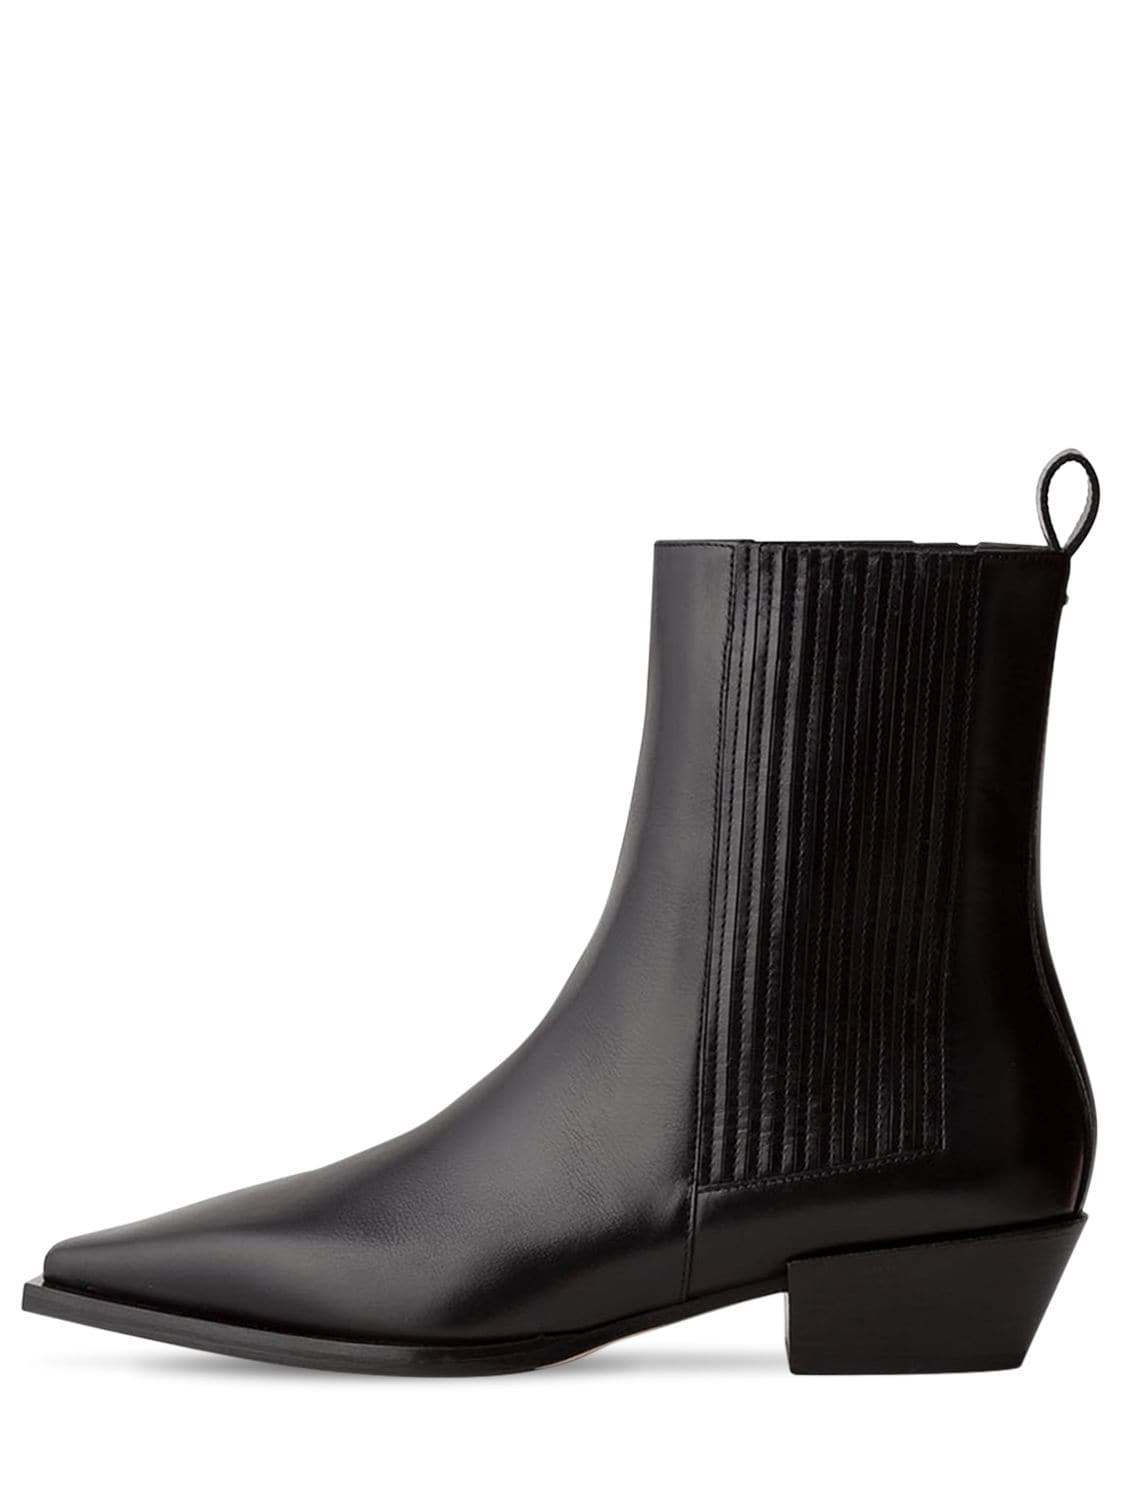 AEYDE 40mm Belinda Leather Ankle Boots